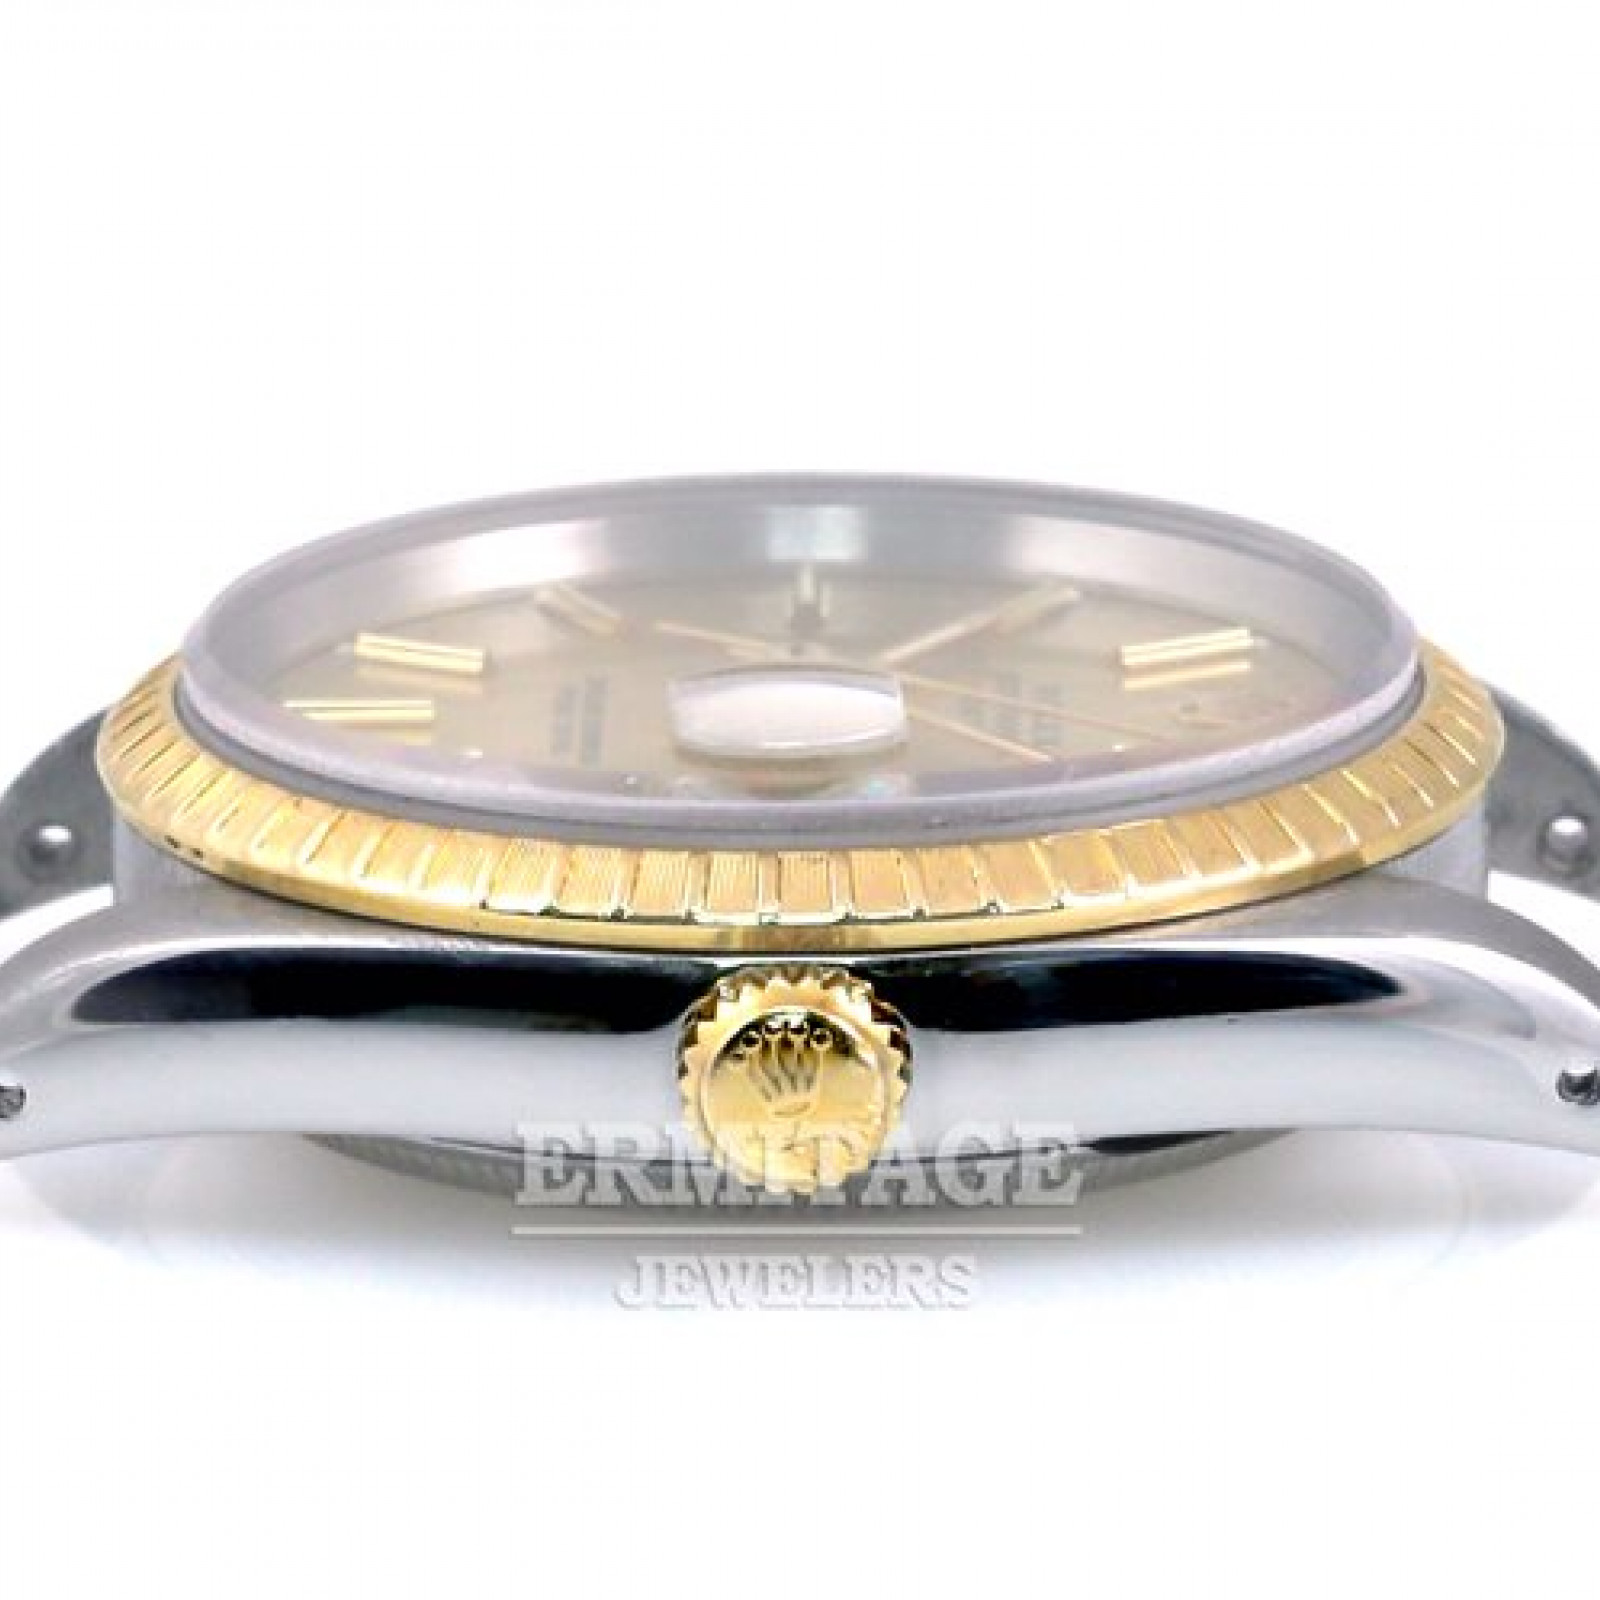 Pre-Owned Rolex Oyster Perpetual Date 15223